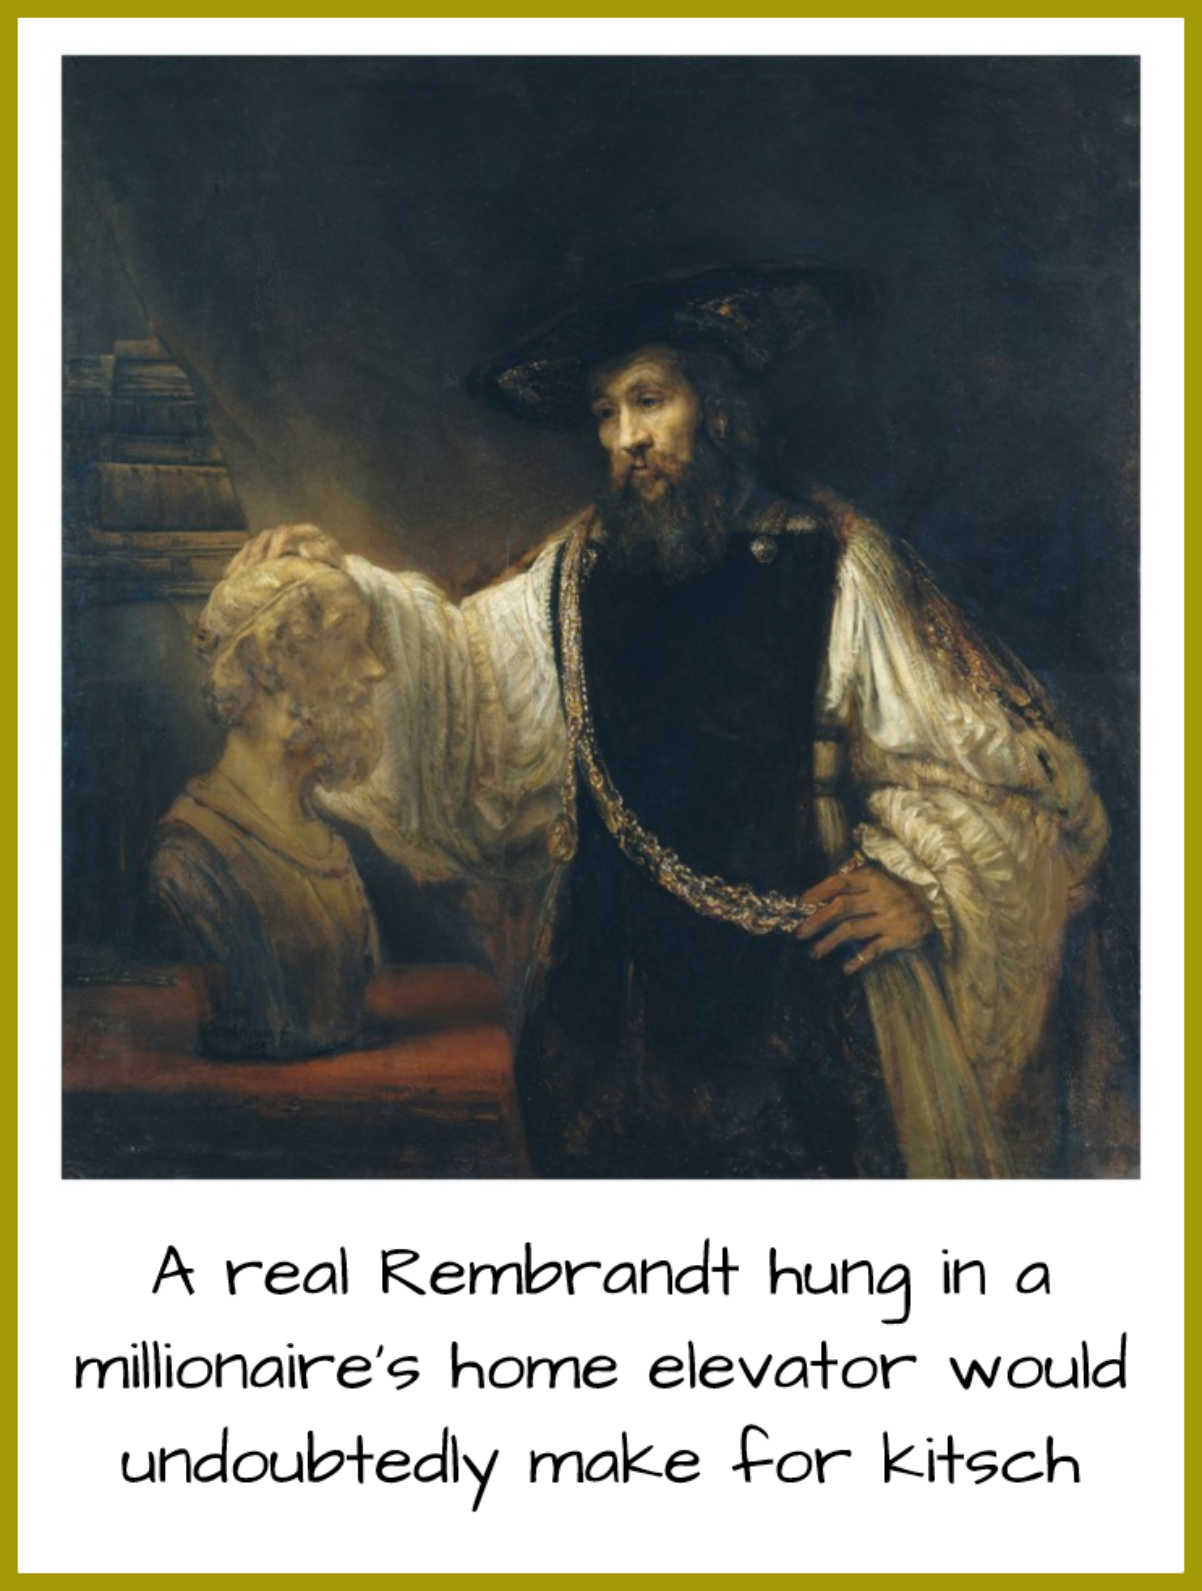 A real Rembrandt hung in a millionaire’s home elevator would undoubtedly make for kitsch. - MATEI CĂLINESCU